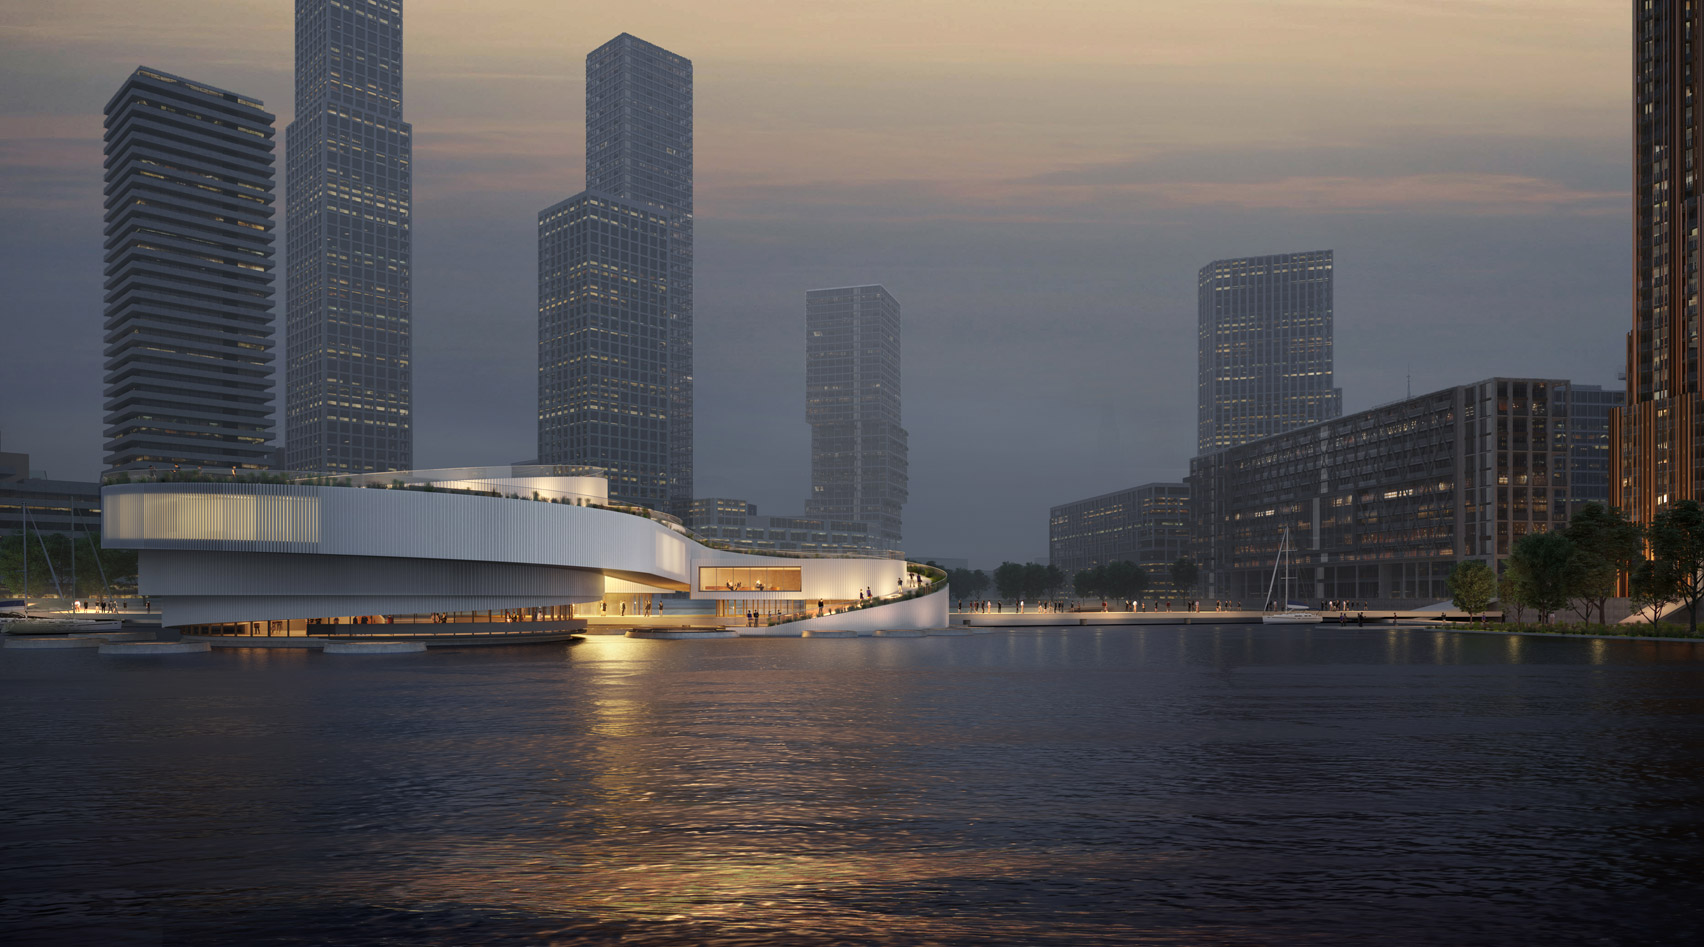 The exterior of the Maritime Center Rotterdam by Mecanoo